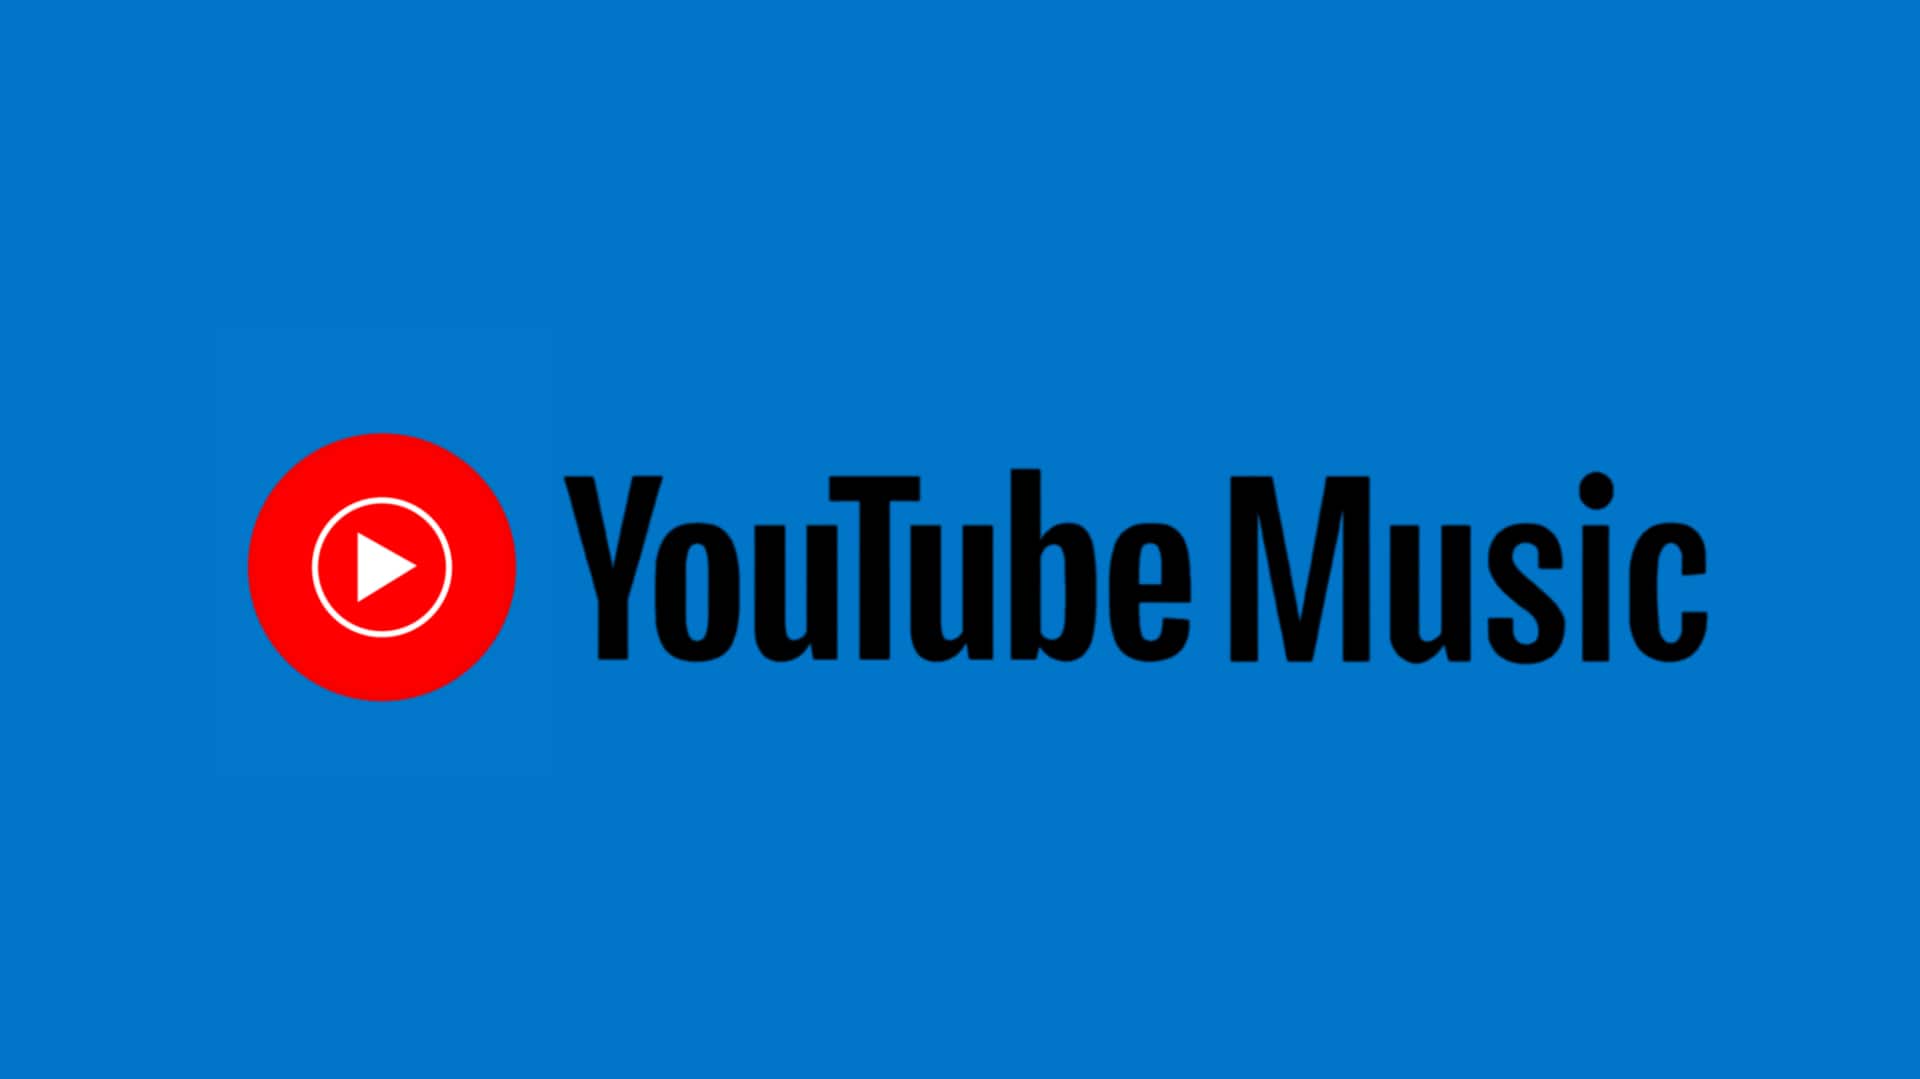 YouTube Music adds song play counts, AI playlist art creator